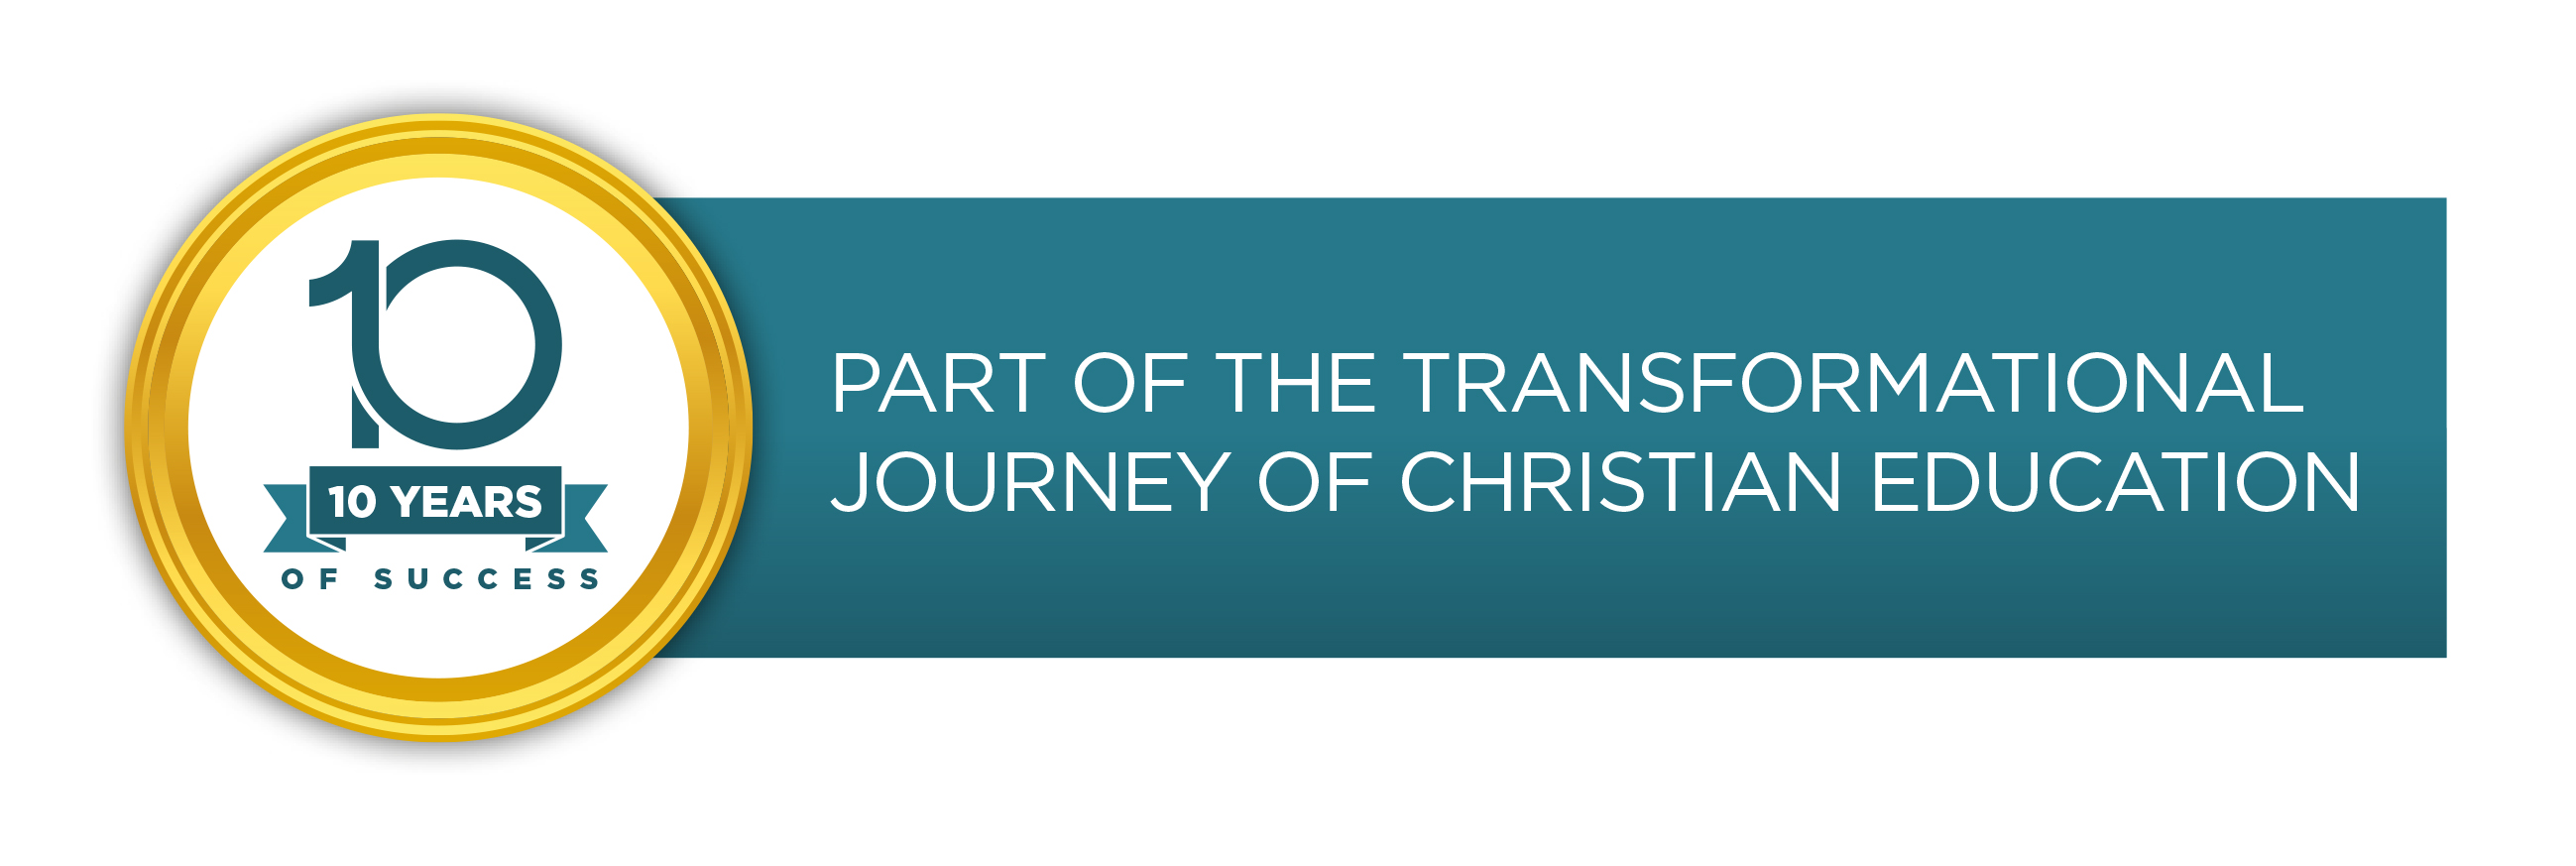 10 Years of Success. Part of the Transformational Journey of Christian Education